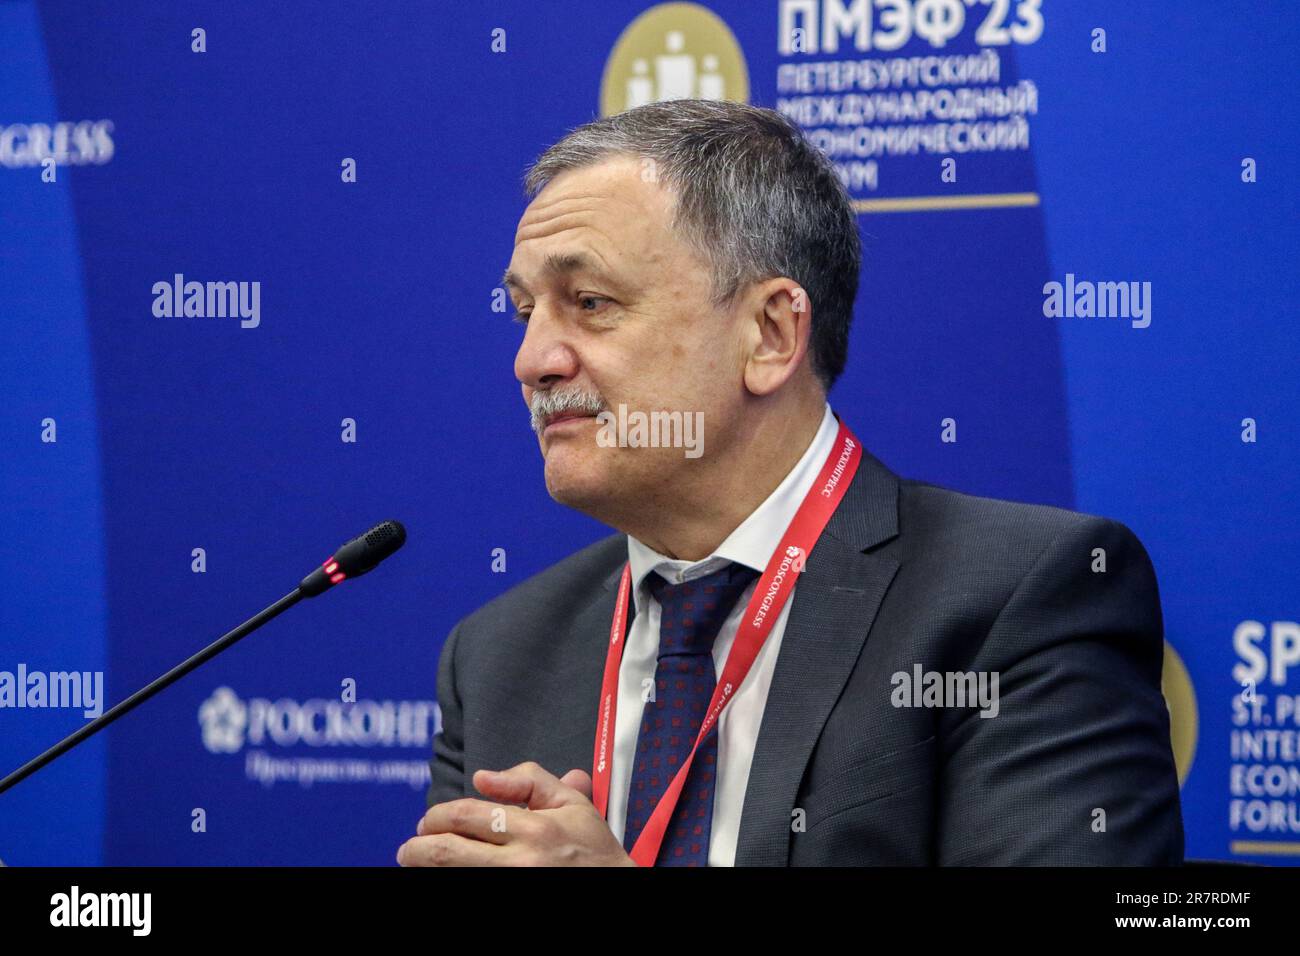 Saint Petersburg, Russia. 16th June, 2023. Ruslan Davydov, Russian statesman. Acting Head of the Federal Customs Service of the Russian Federation, attends a session on A Digital Area of Growth: How Labelling is Changing the Business Climate in the framework of the St. Petersburg International Economic Forum 2023 (SPIEF 2023). Credit: SOPA Images Limited/Alamy Live News Stock Photo